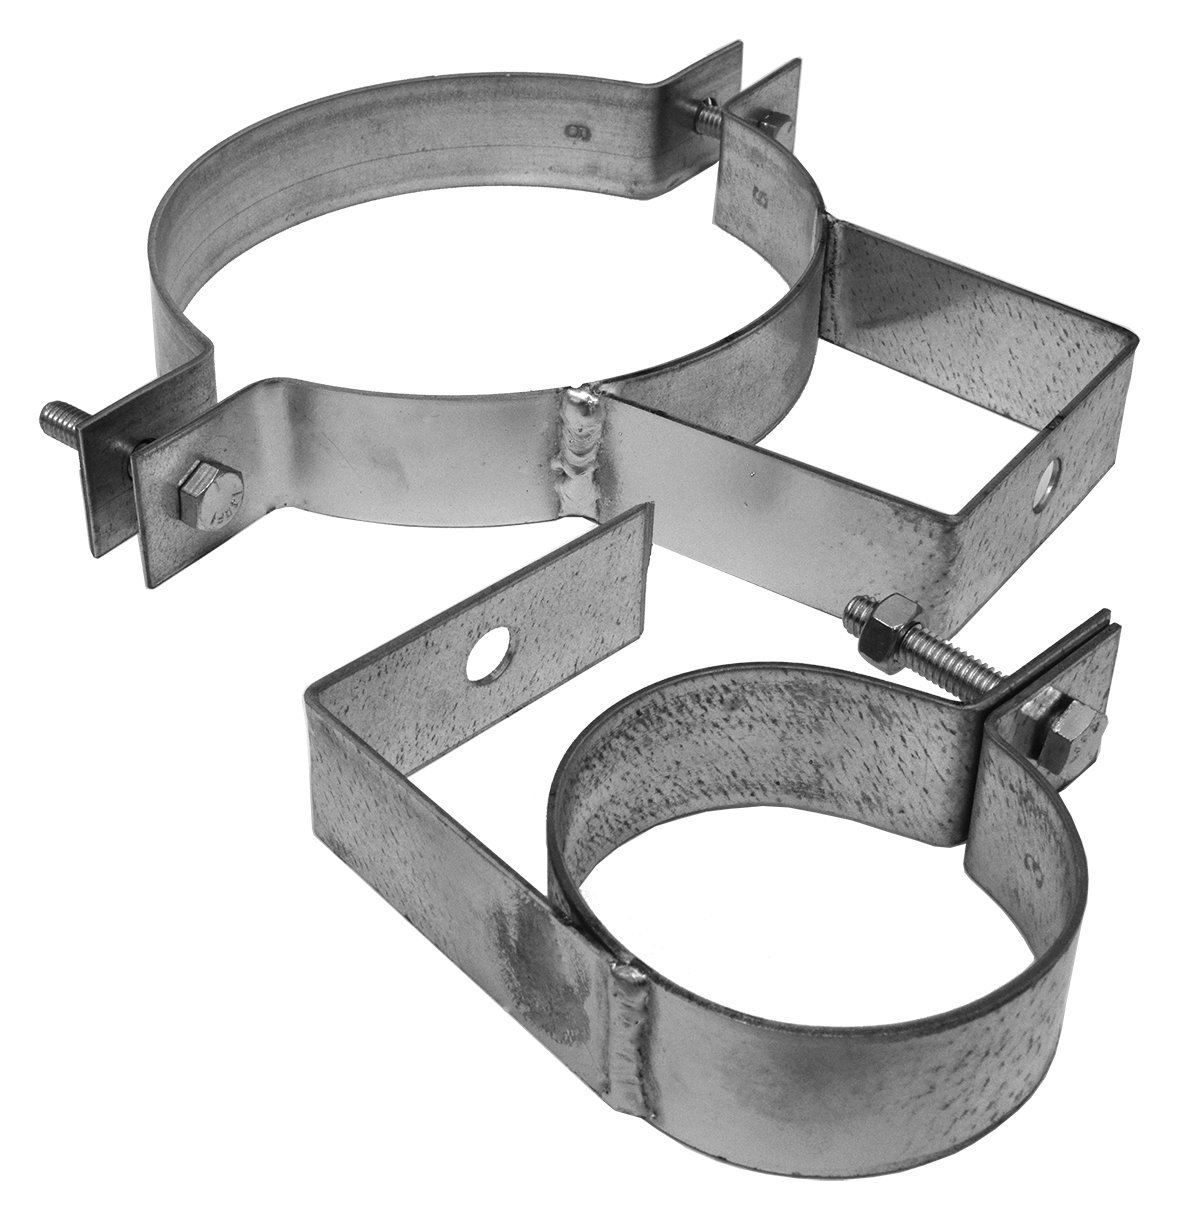 NORDFAB 3265-0800-1HJ000 Pipe Hanger,8" Duct Size 